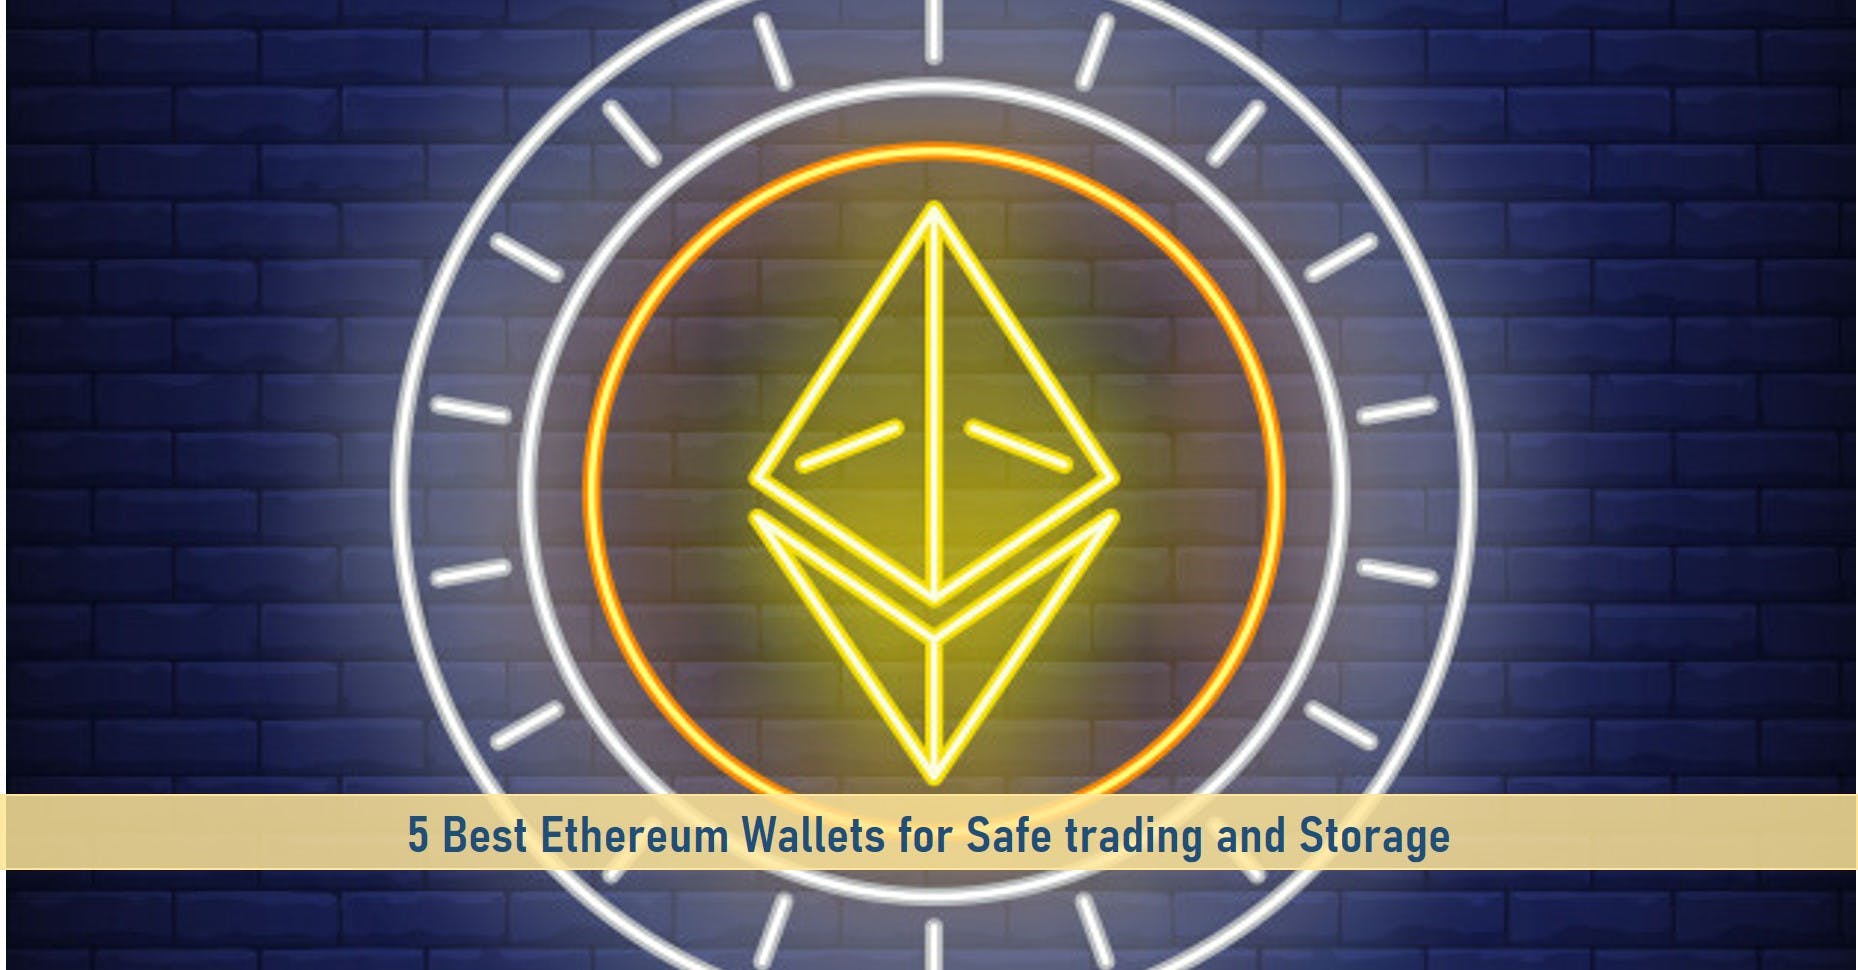 5 Best Ethereum Wallets for Safe trading and Storage